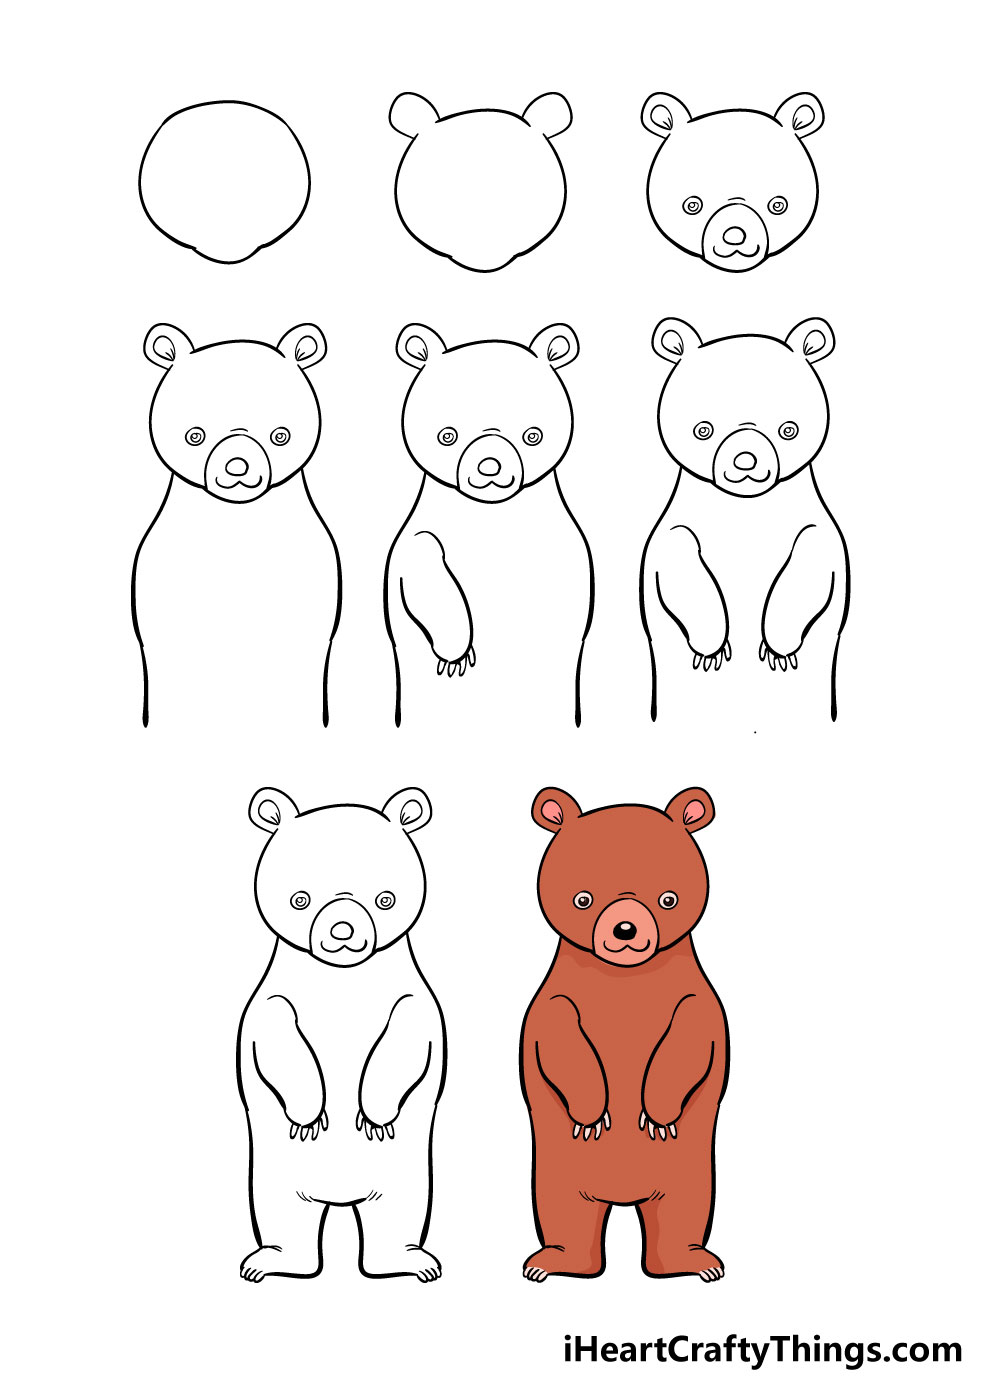 how to draw bear in 8 steps